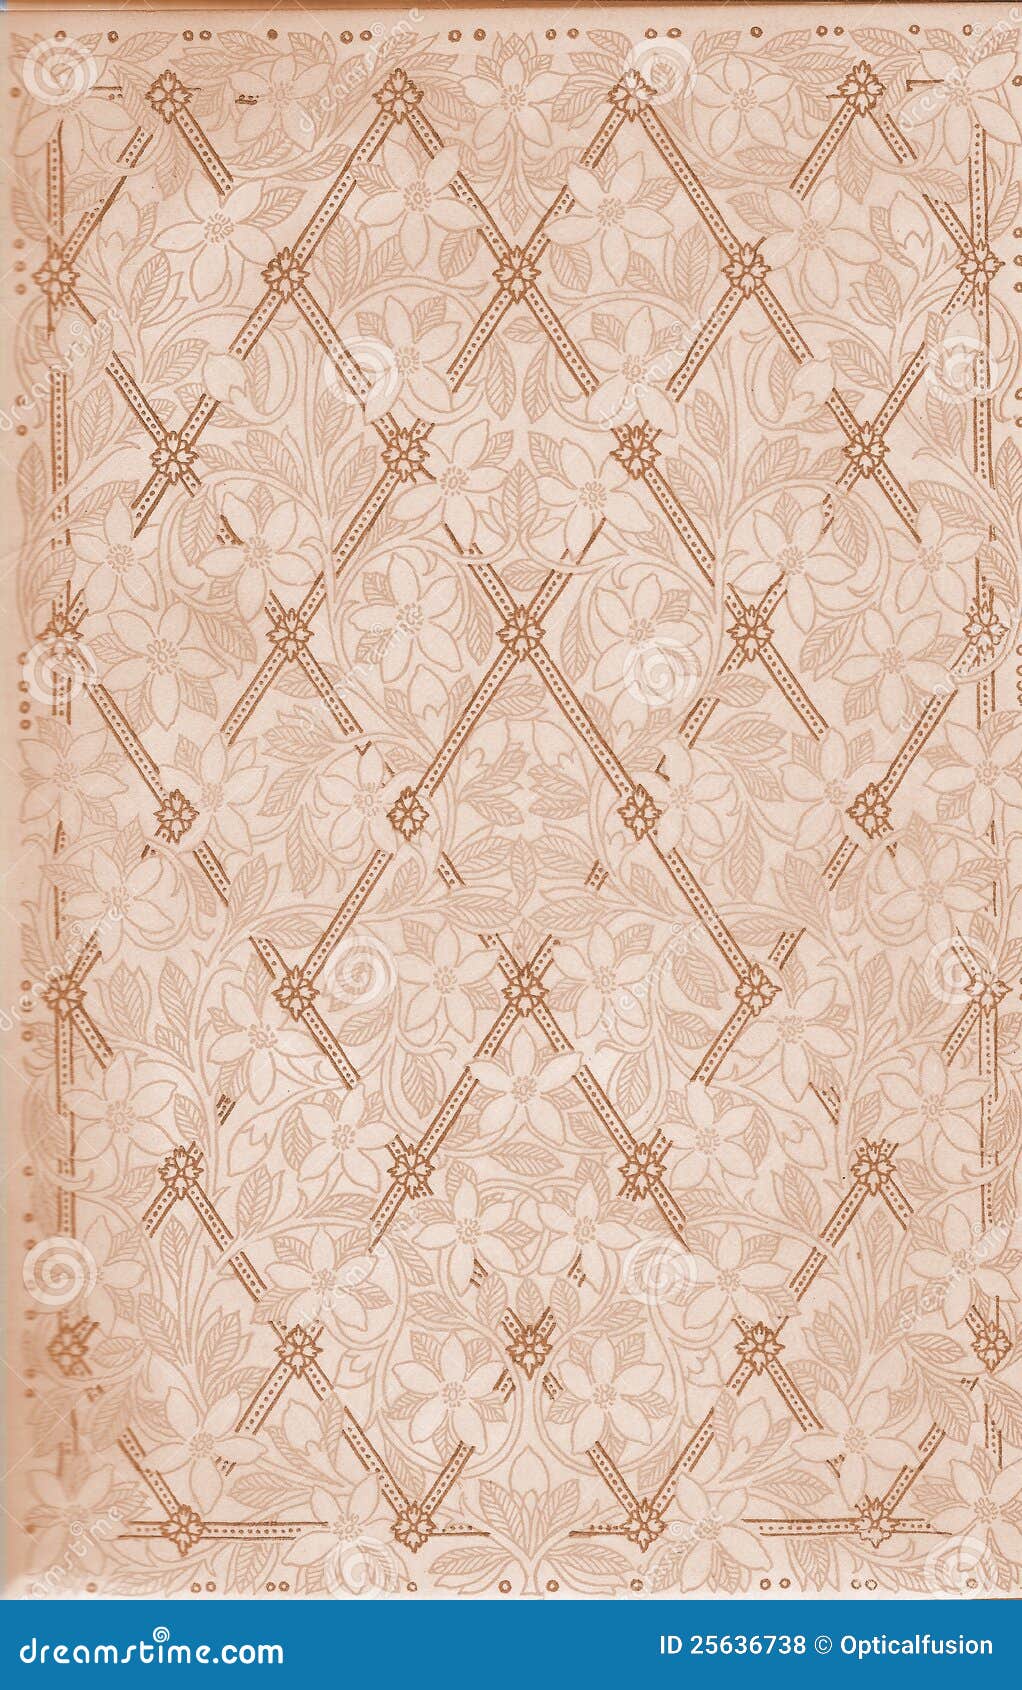 vintage floral and lattice pattern paper from book